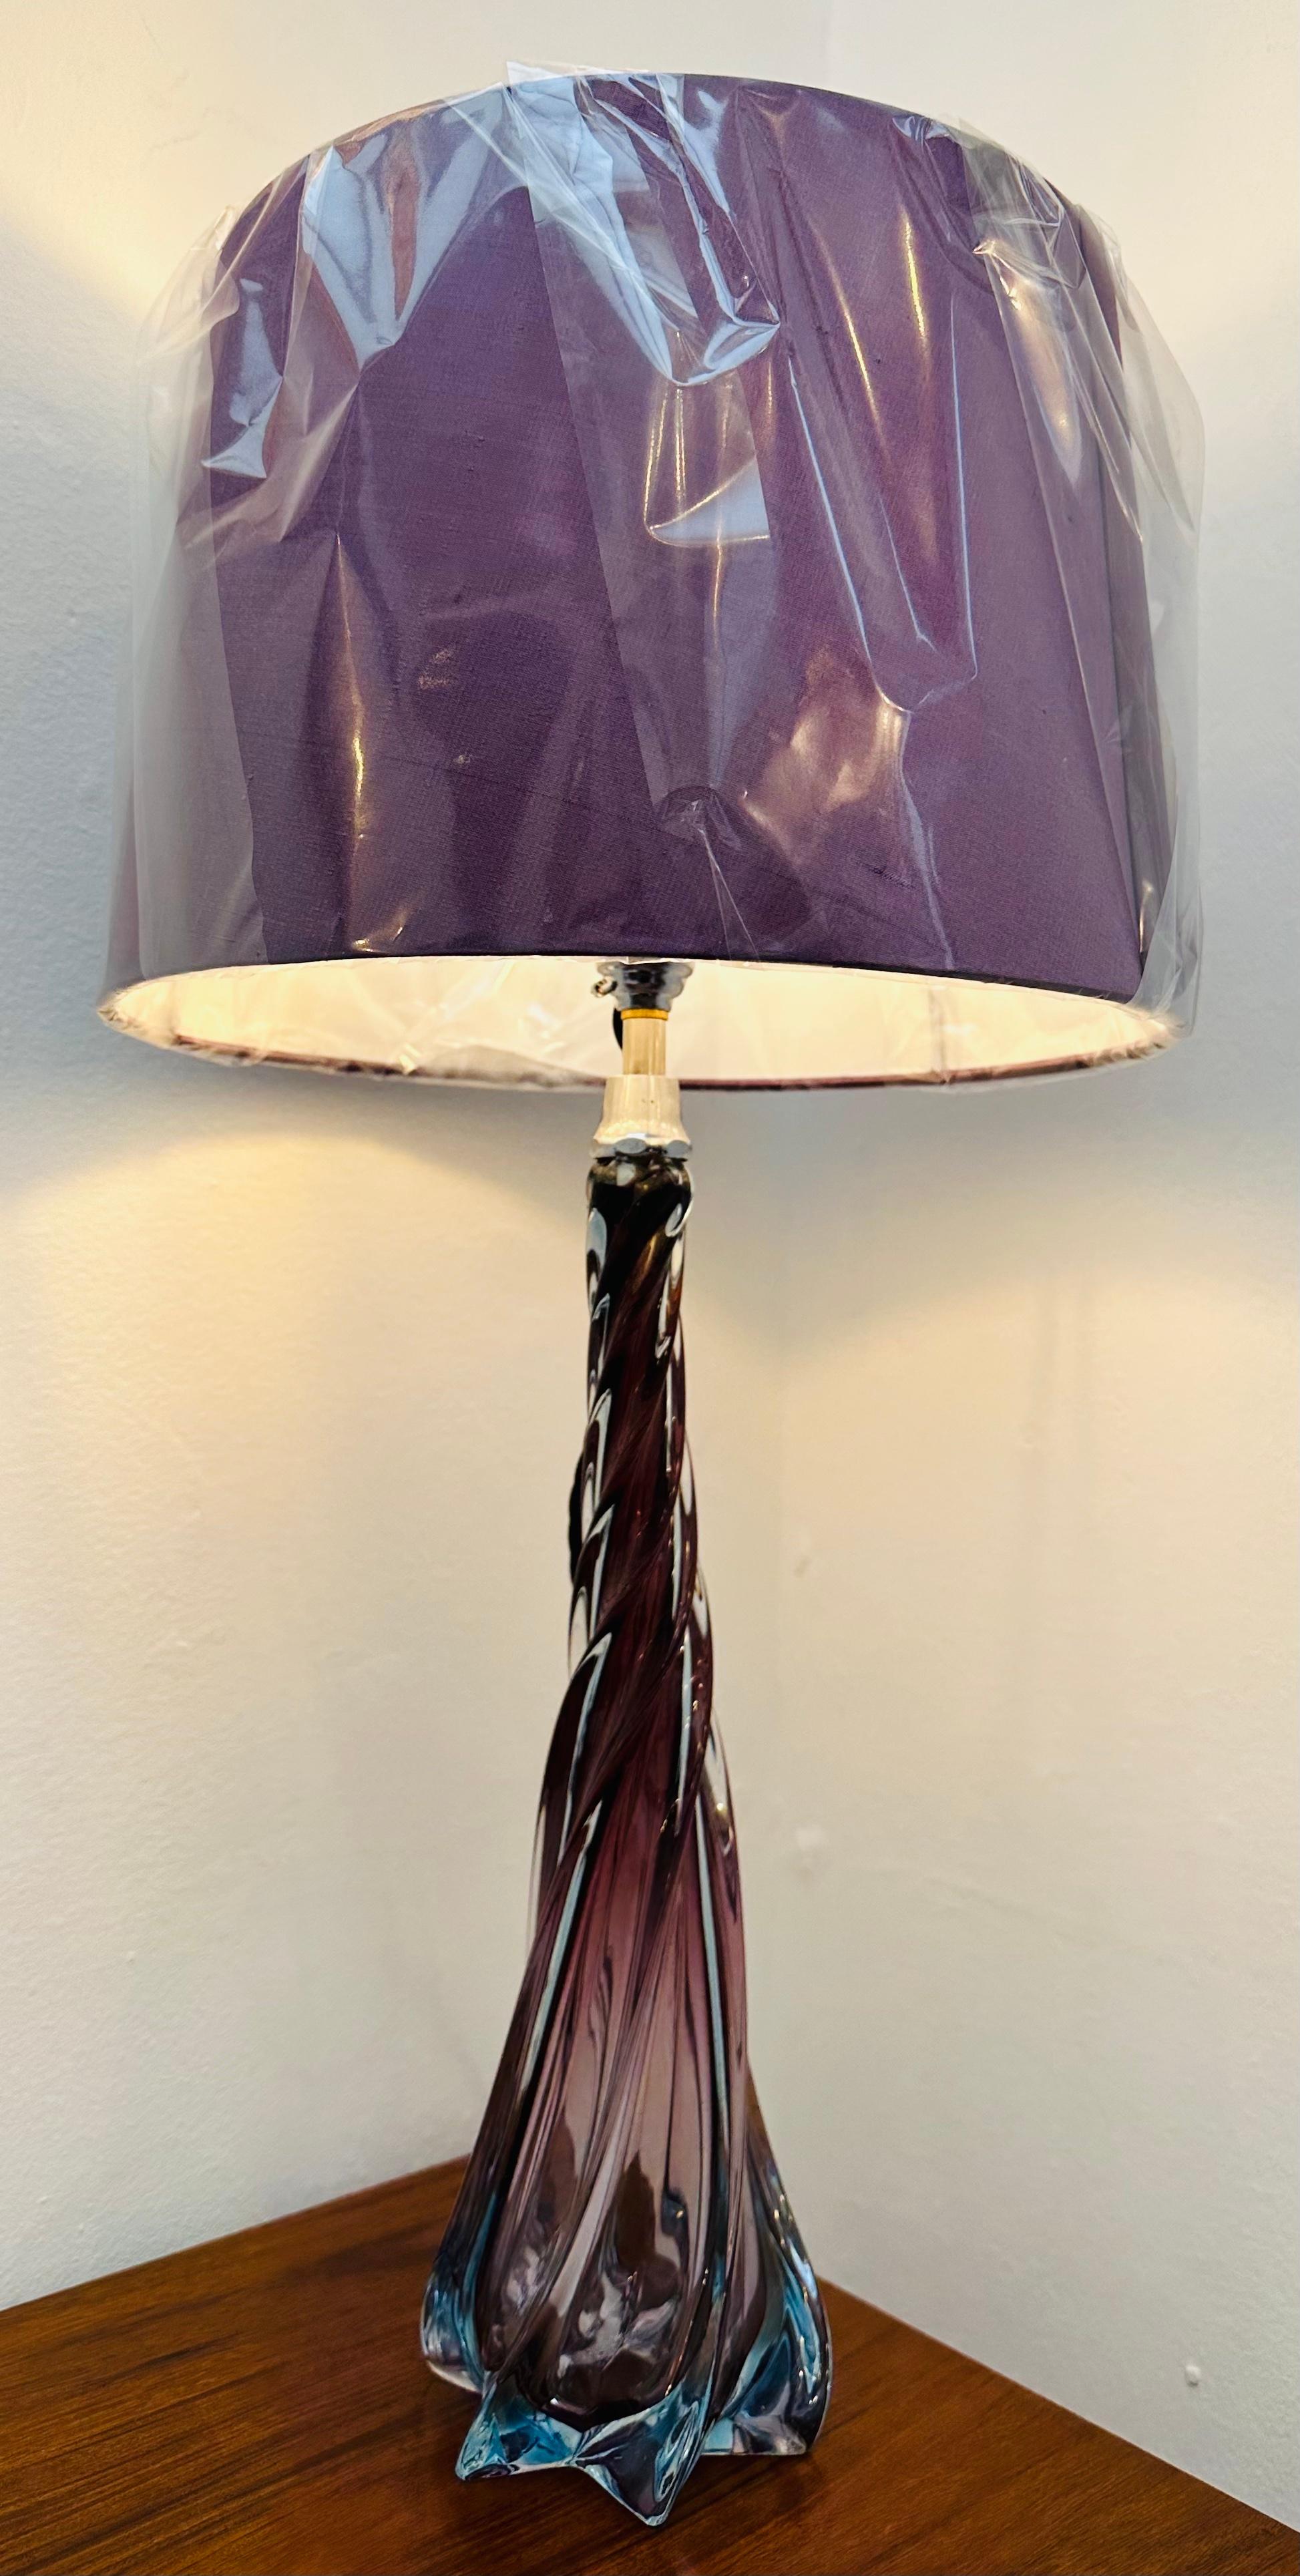 A wonderful 1950s Belgium table lamp which is attributed to Val Saint Lambert. This swirled table lamp is purple at the top with the blue being gradually introduced in each of the fins which which form a six pointed star at the base. The lamp is